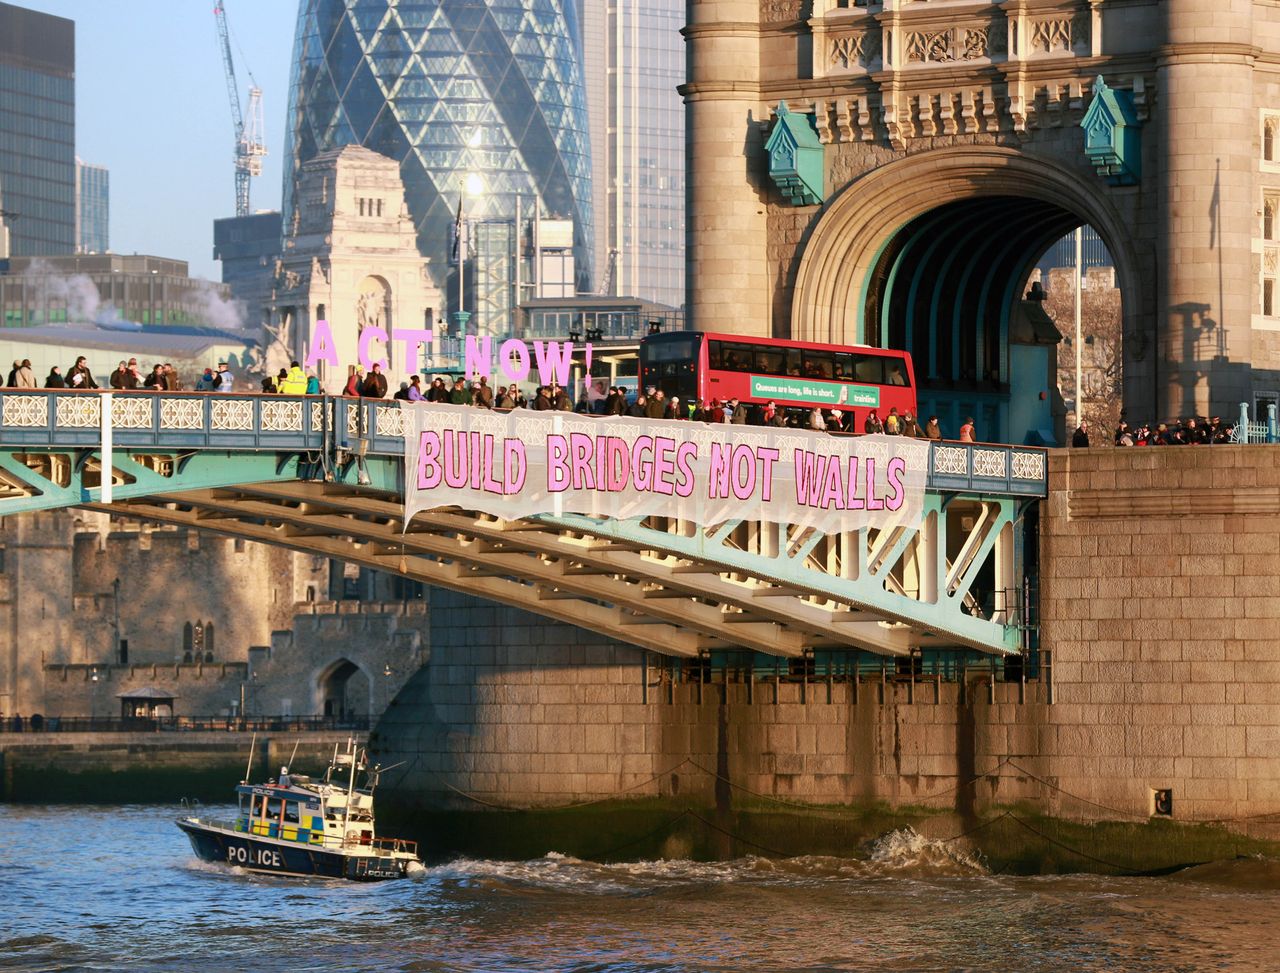 A banner is unfurled on London's Tower Bridge, organised by Bridges Not Walls.